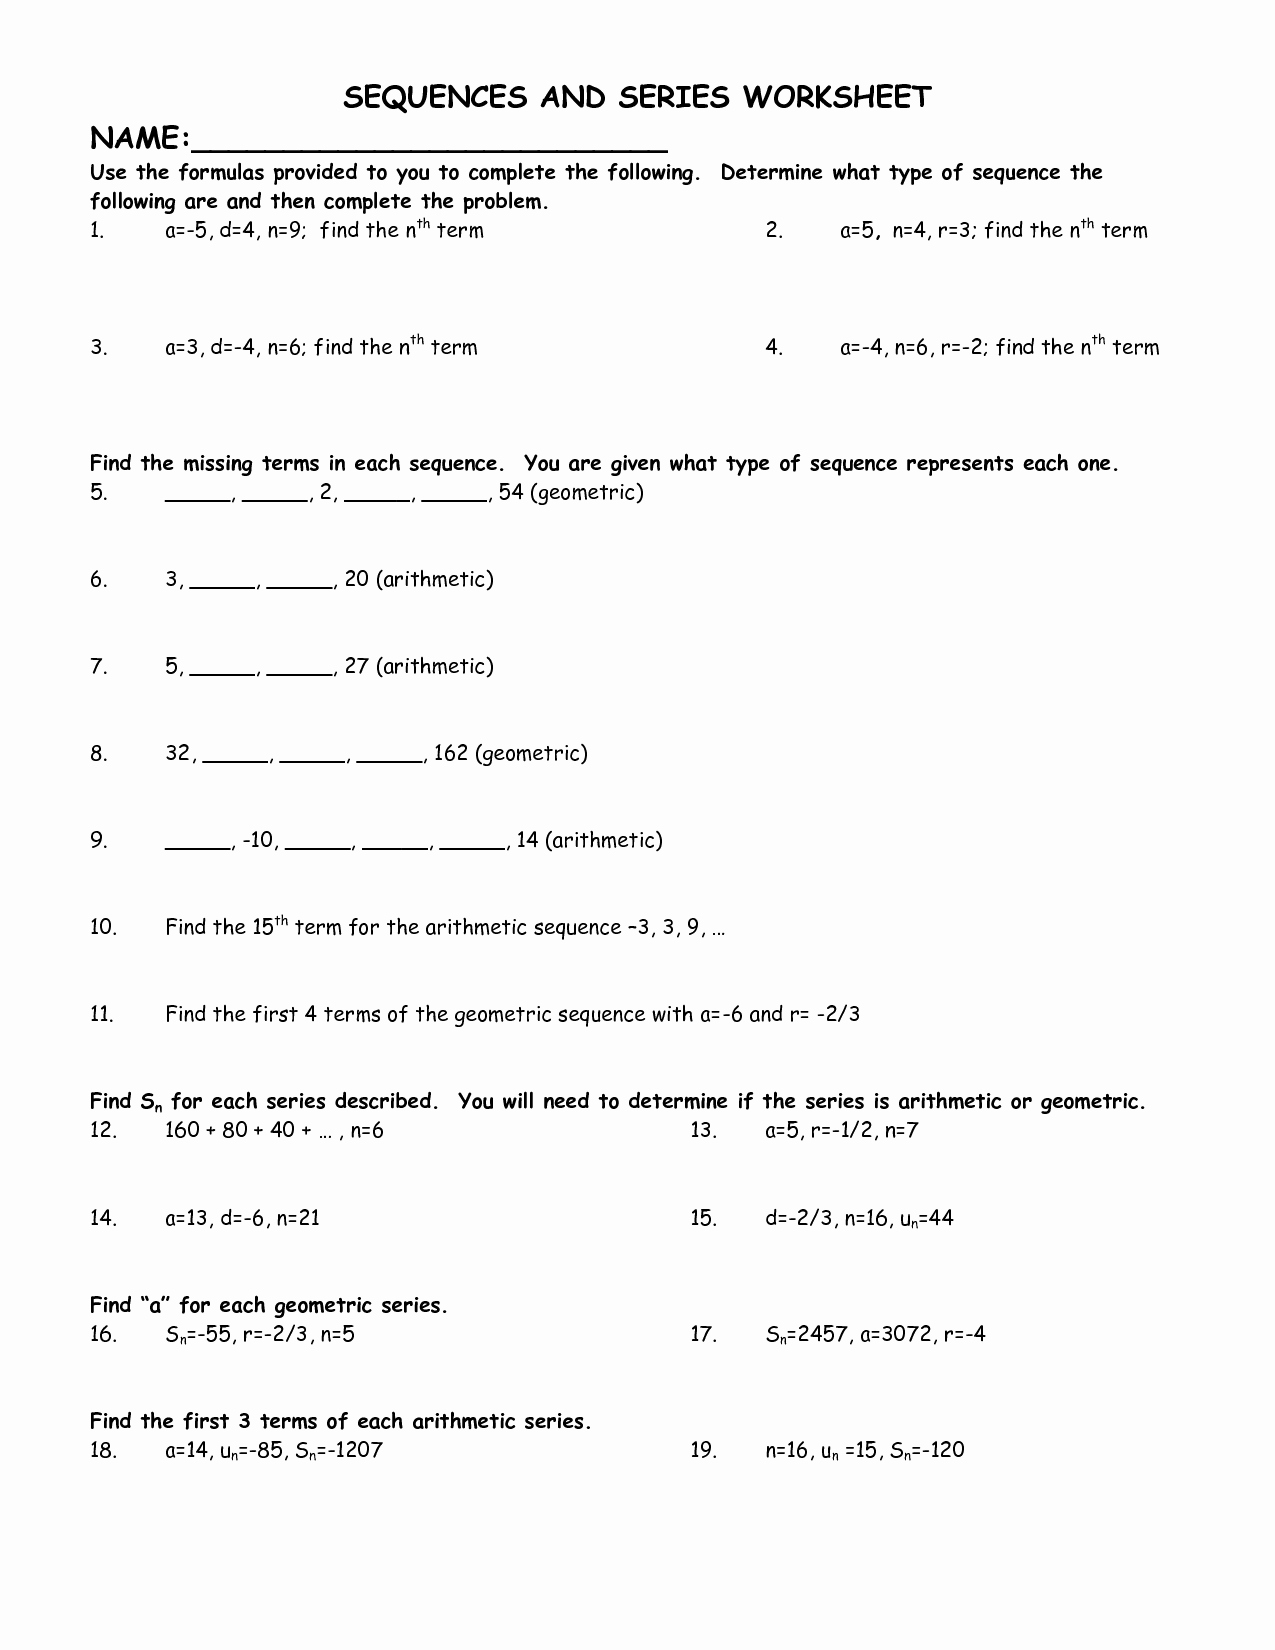 Sequences and Series Worksheet Lovely Story Sequence Worksheet Middle School